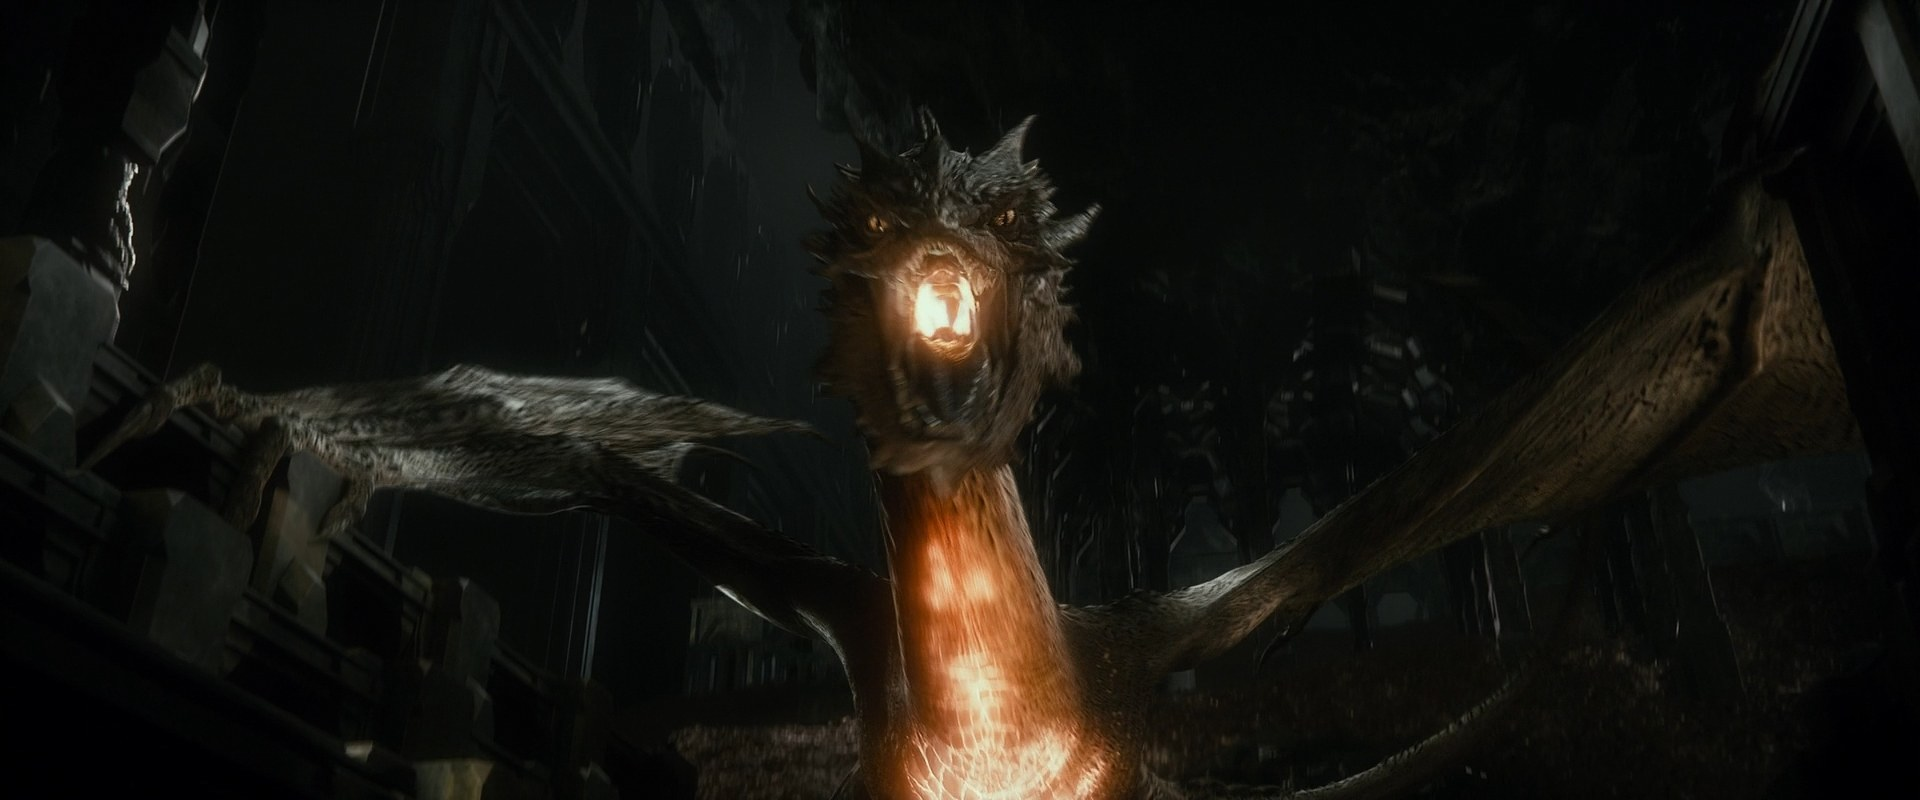 The Best Dragons in Movies, Ranked: From Sisu to The Hobbit's Smaug